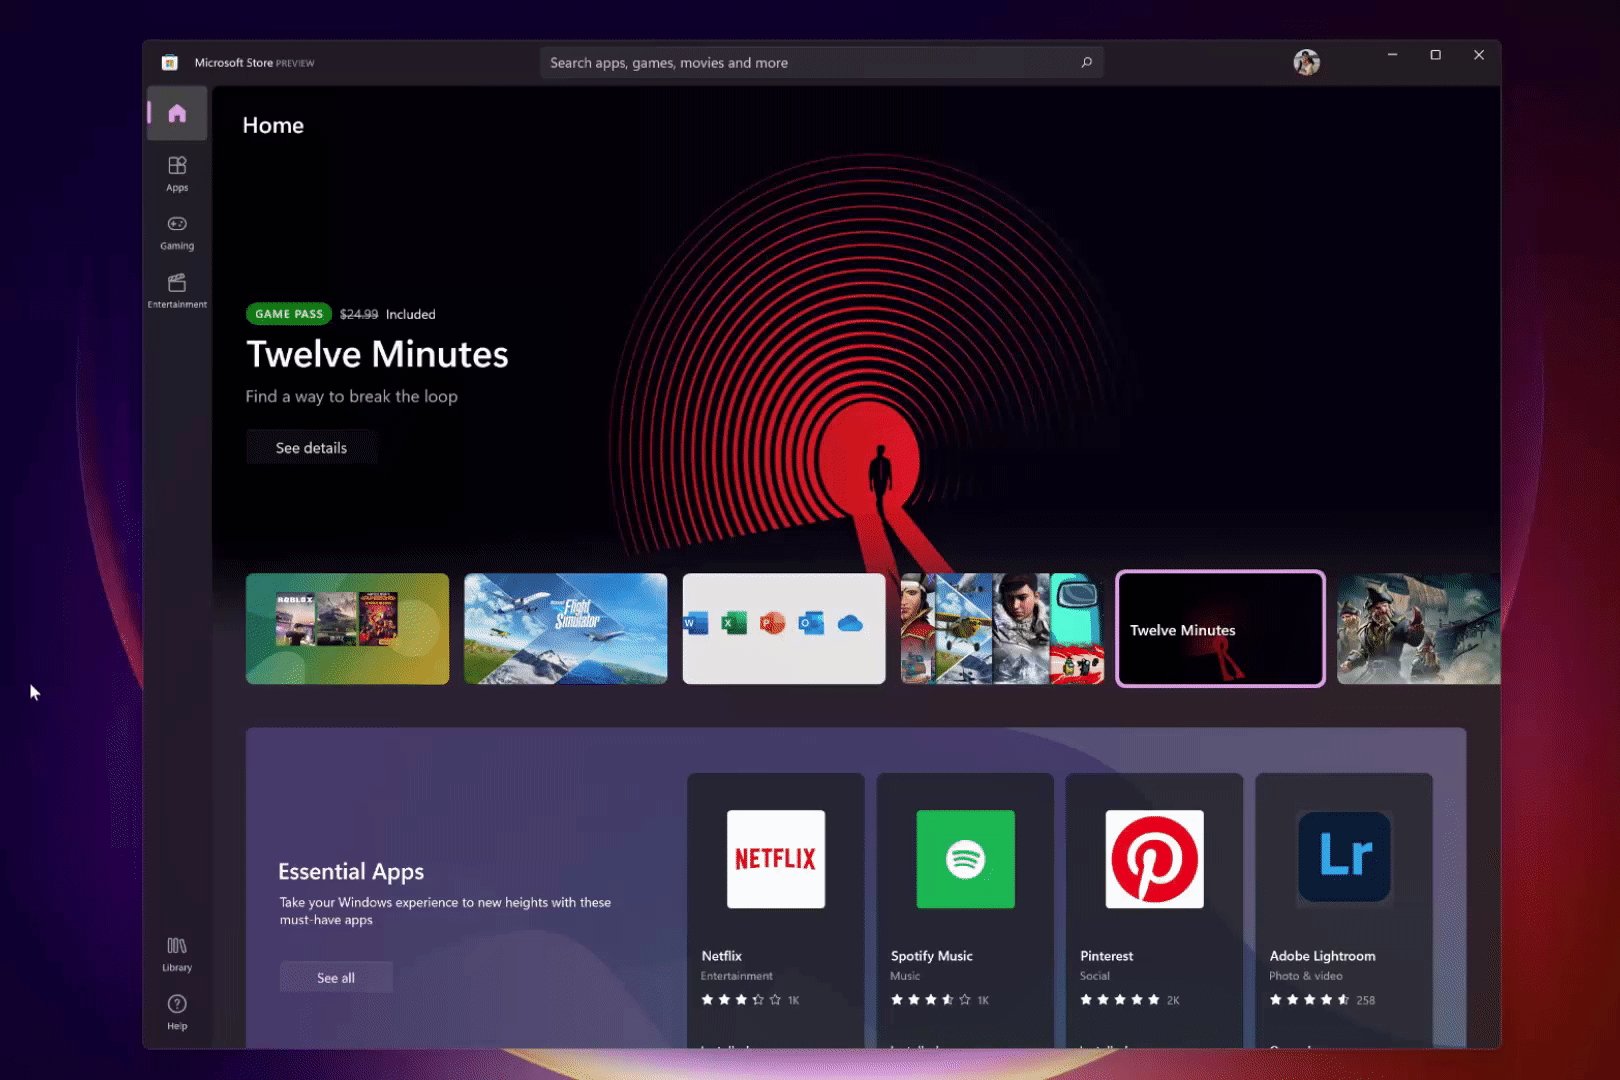 You can now hover over items in Spotlight in the Microsoft Store to see more details.